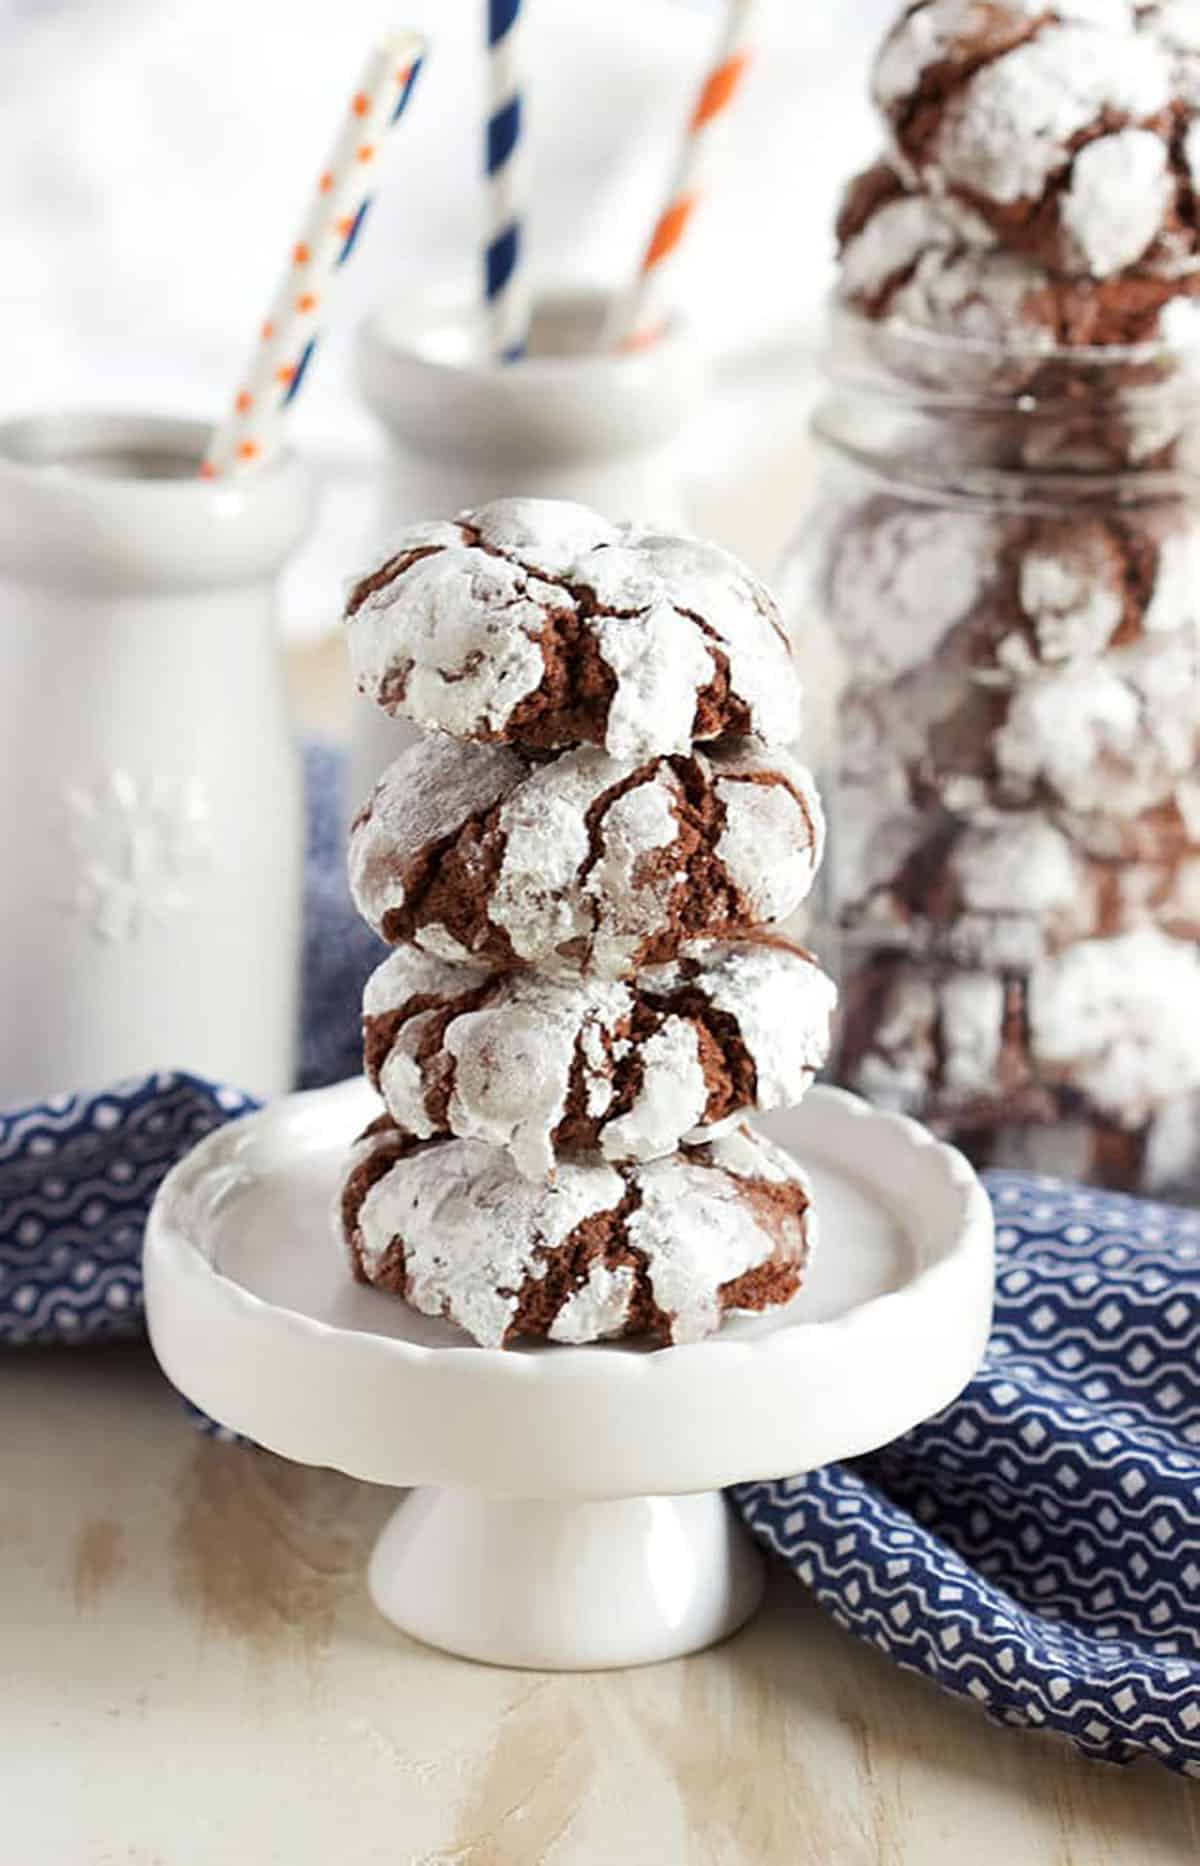 Chocolate crinkle cookies stacked on a cupcake plate on a wood backdrop